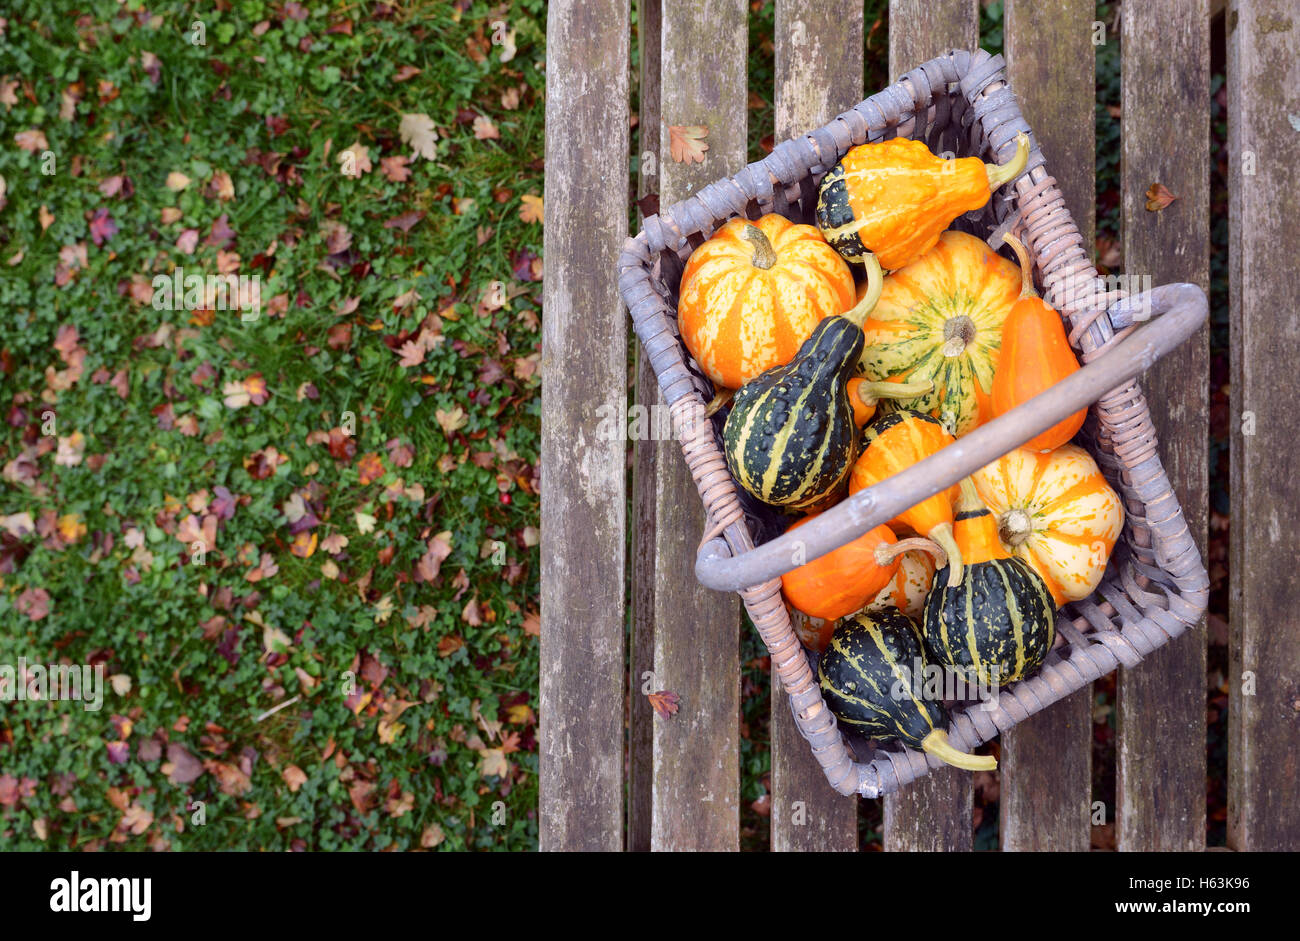 Orange, green and yellow ornamental gourds in a basket on a bench, fall leaves on grass beyond Stock Photo